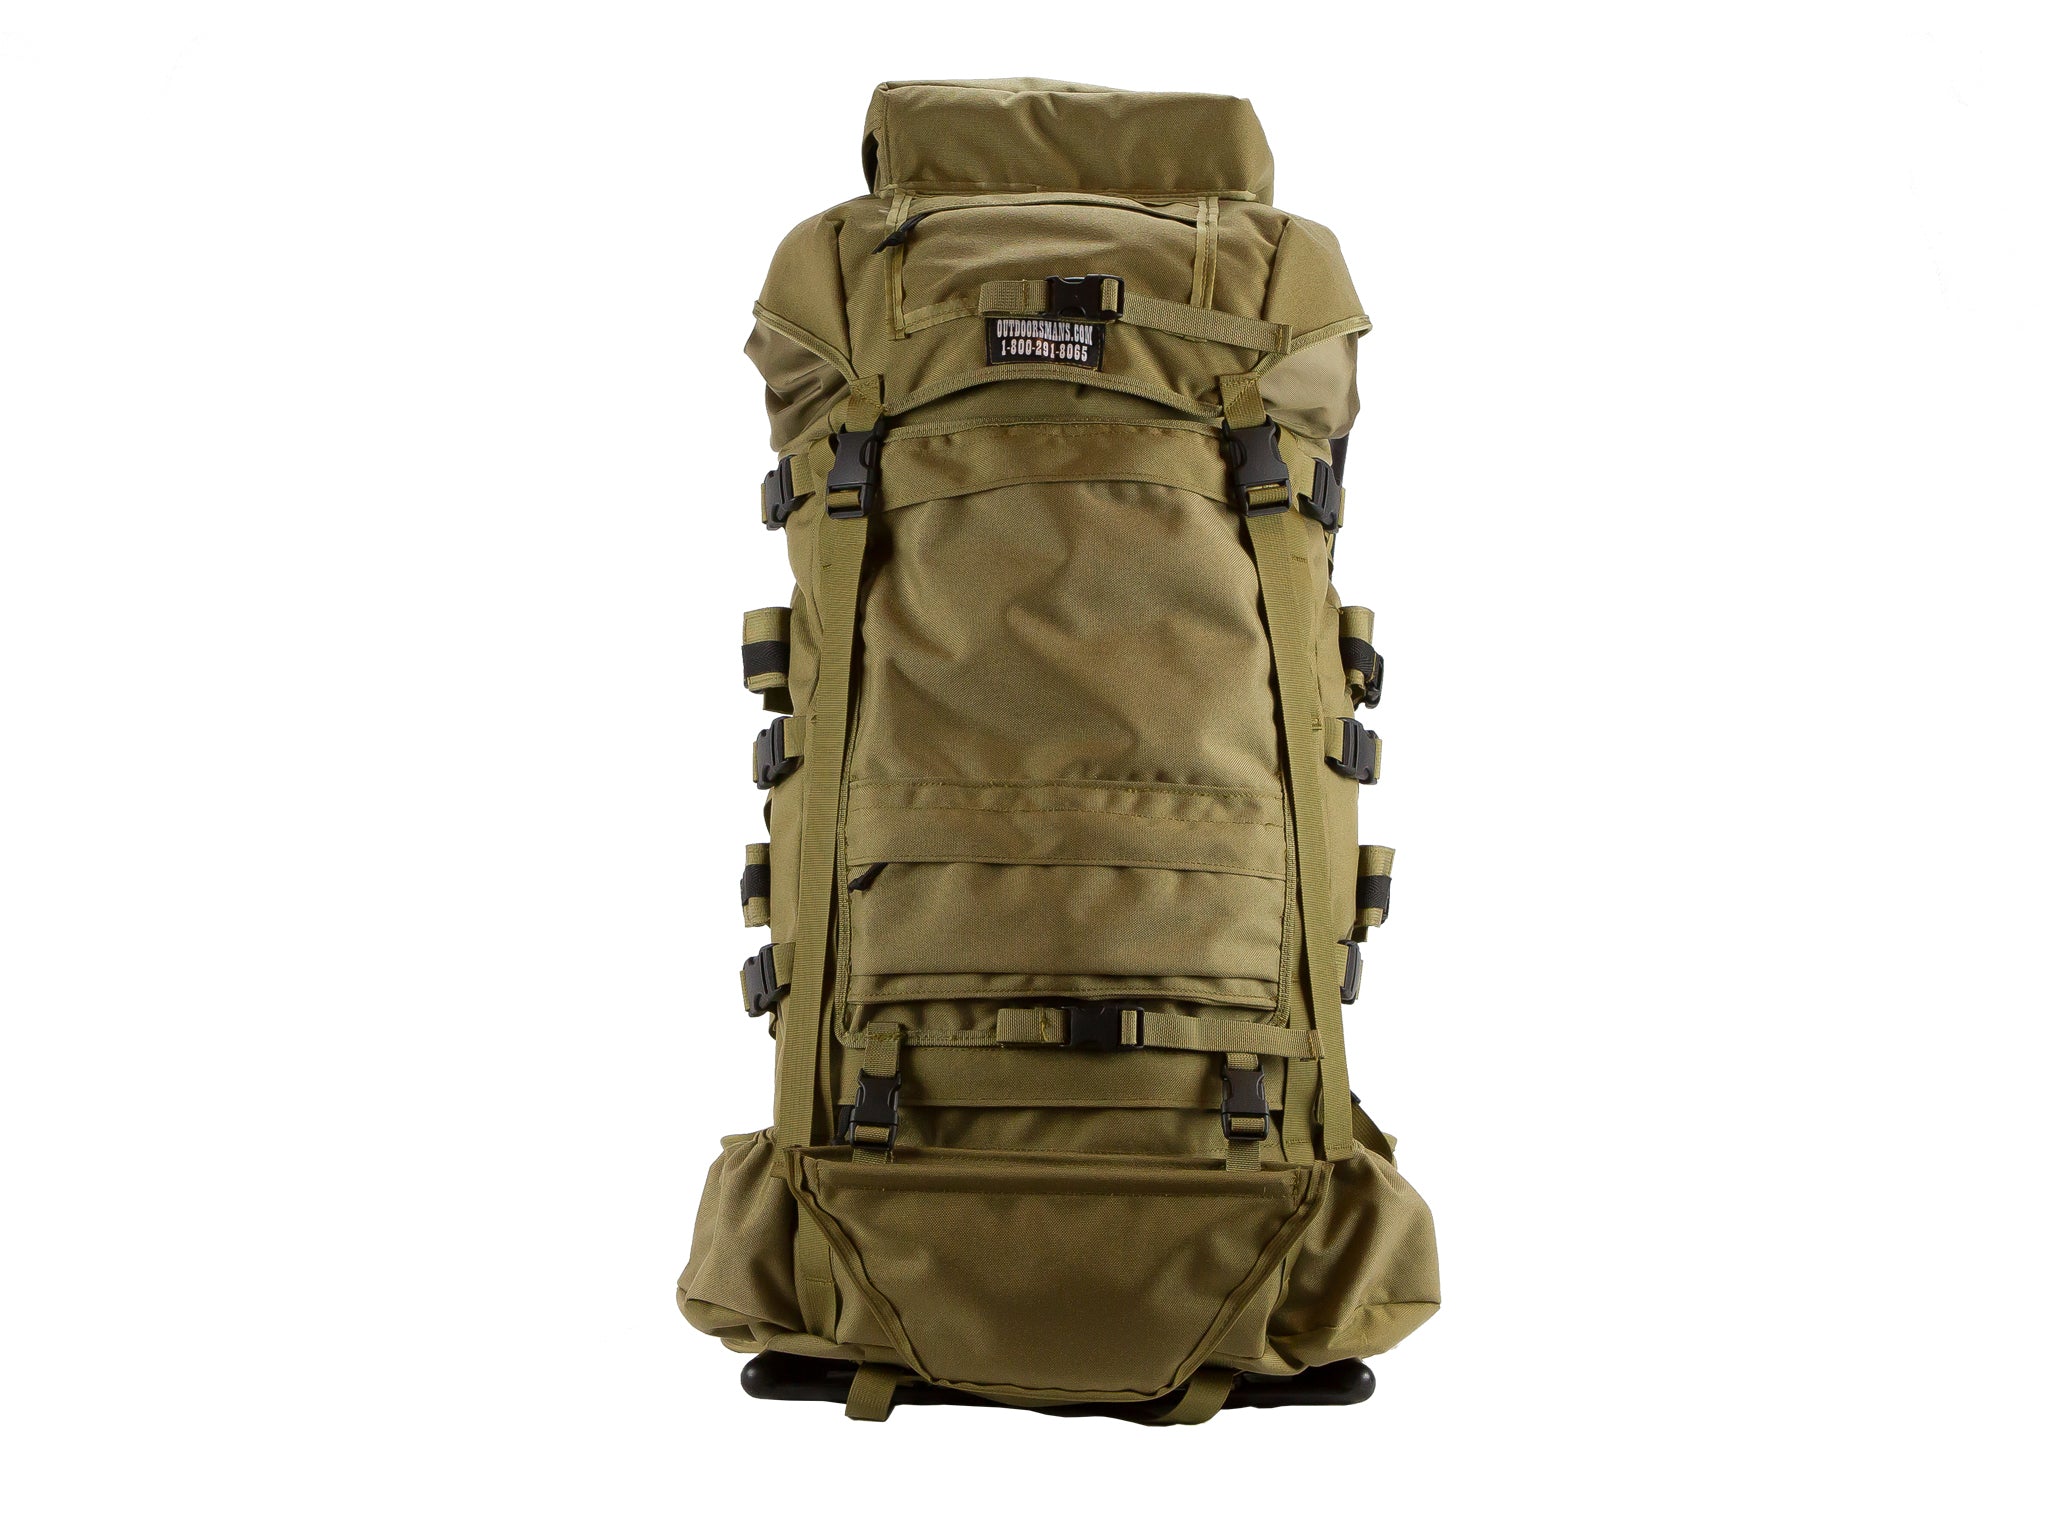 Outdoorsmans – Gear For The Western Hunter